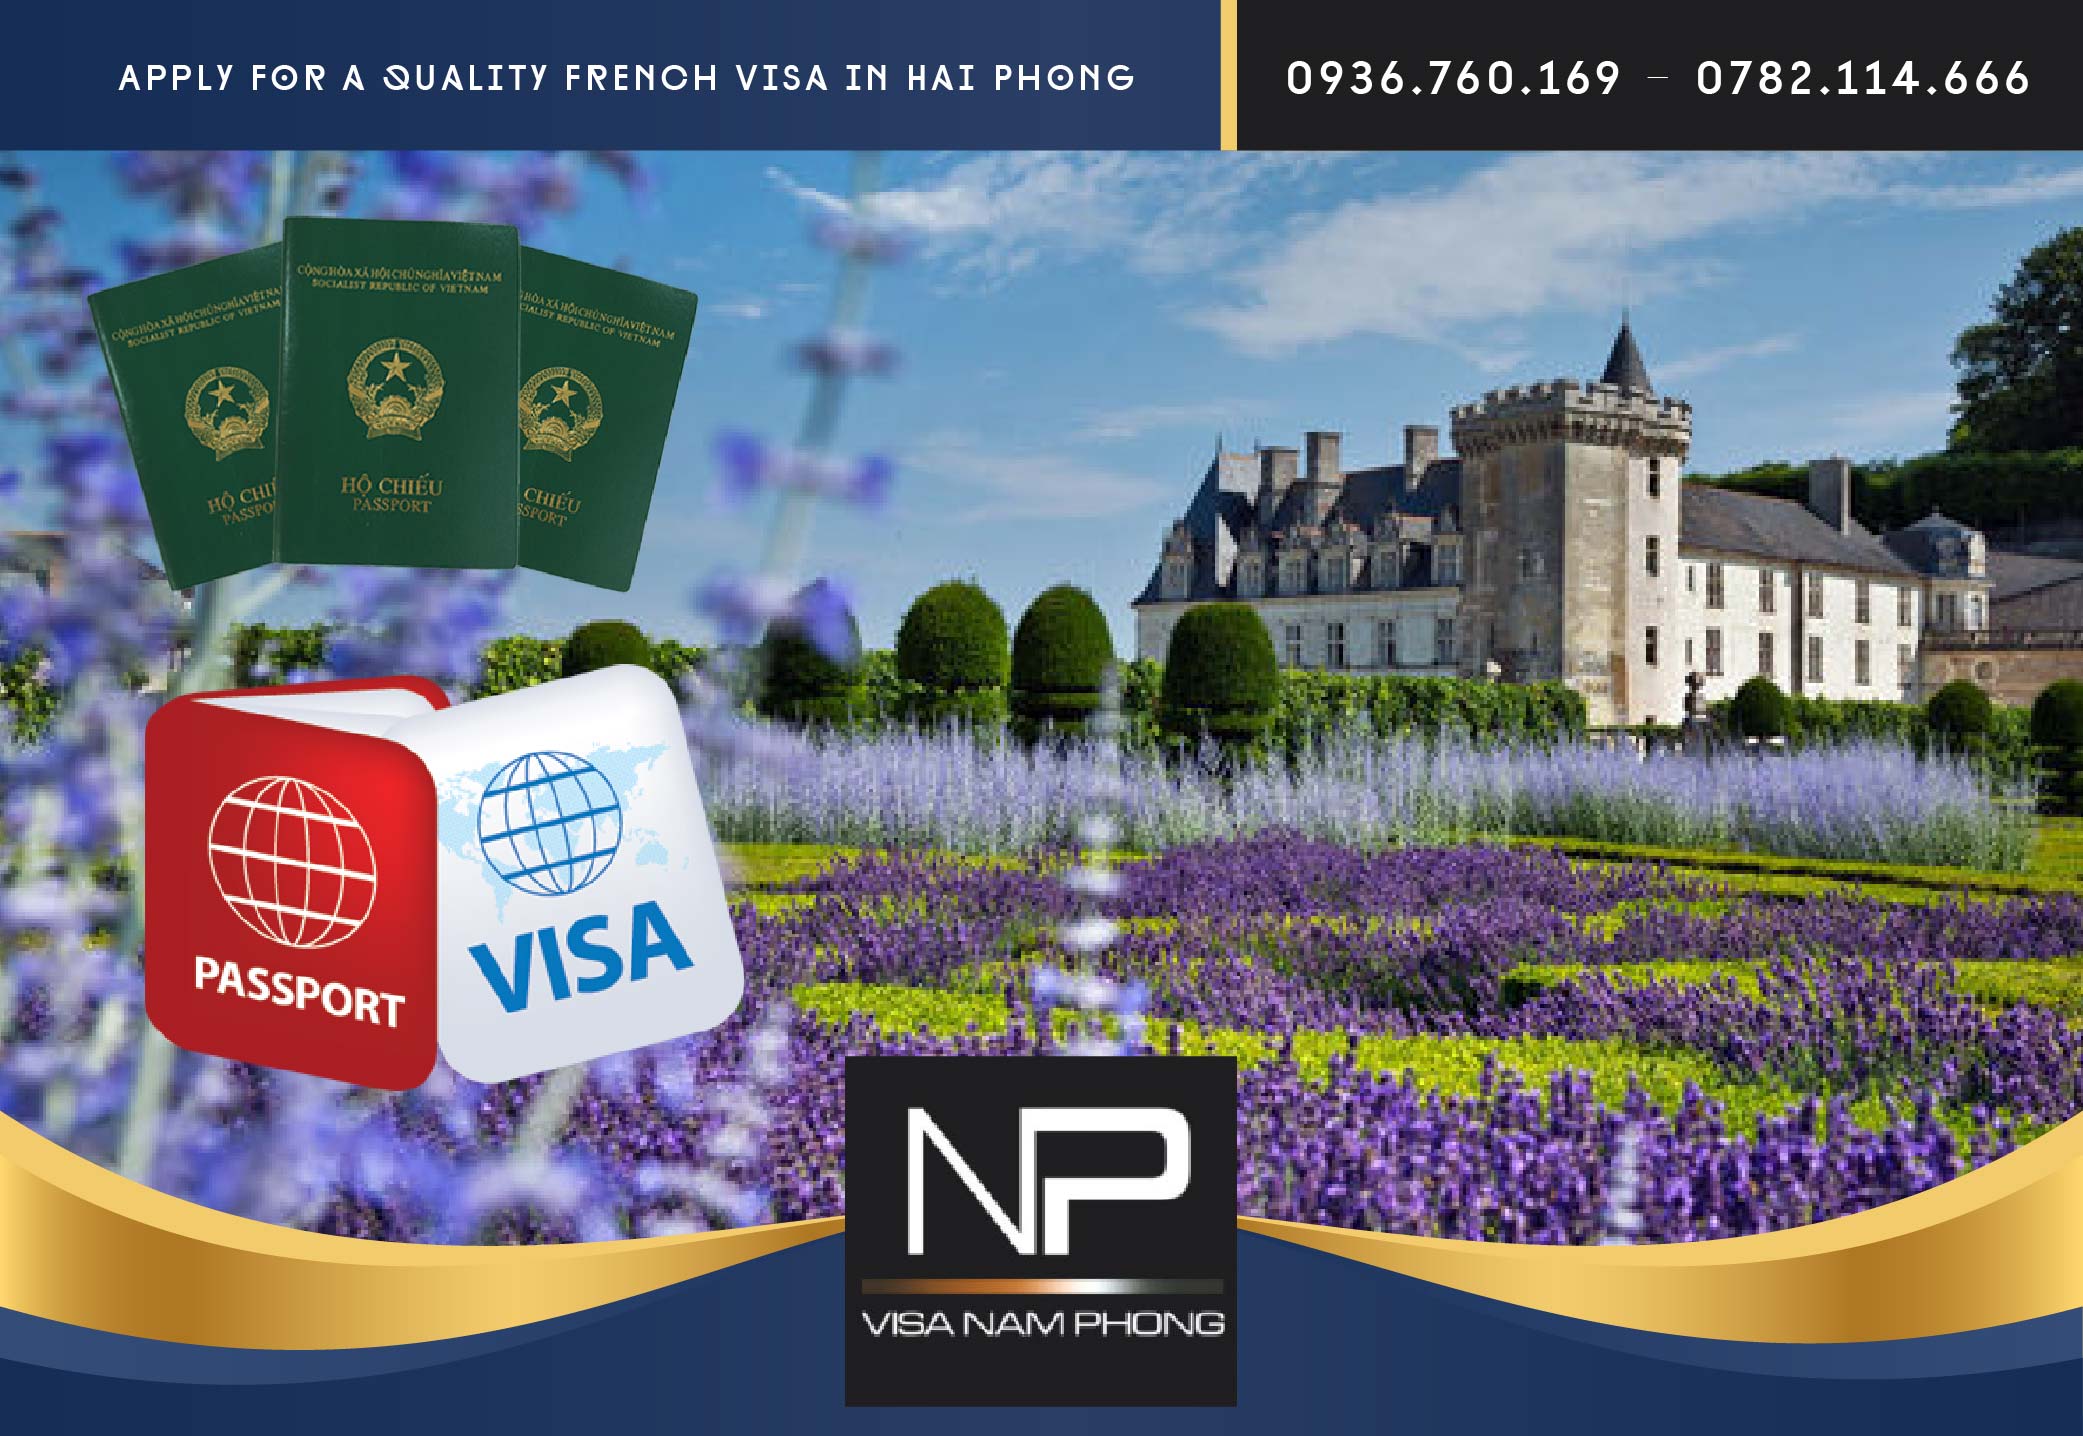 Apply for a quality French visa in Hai Phong